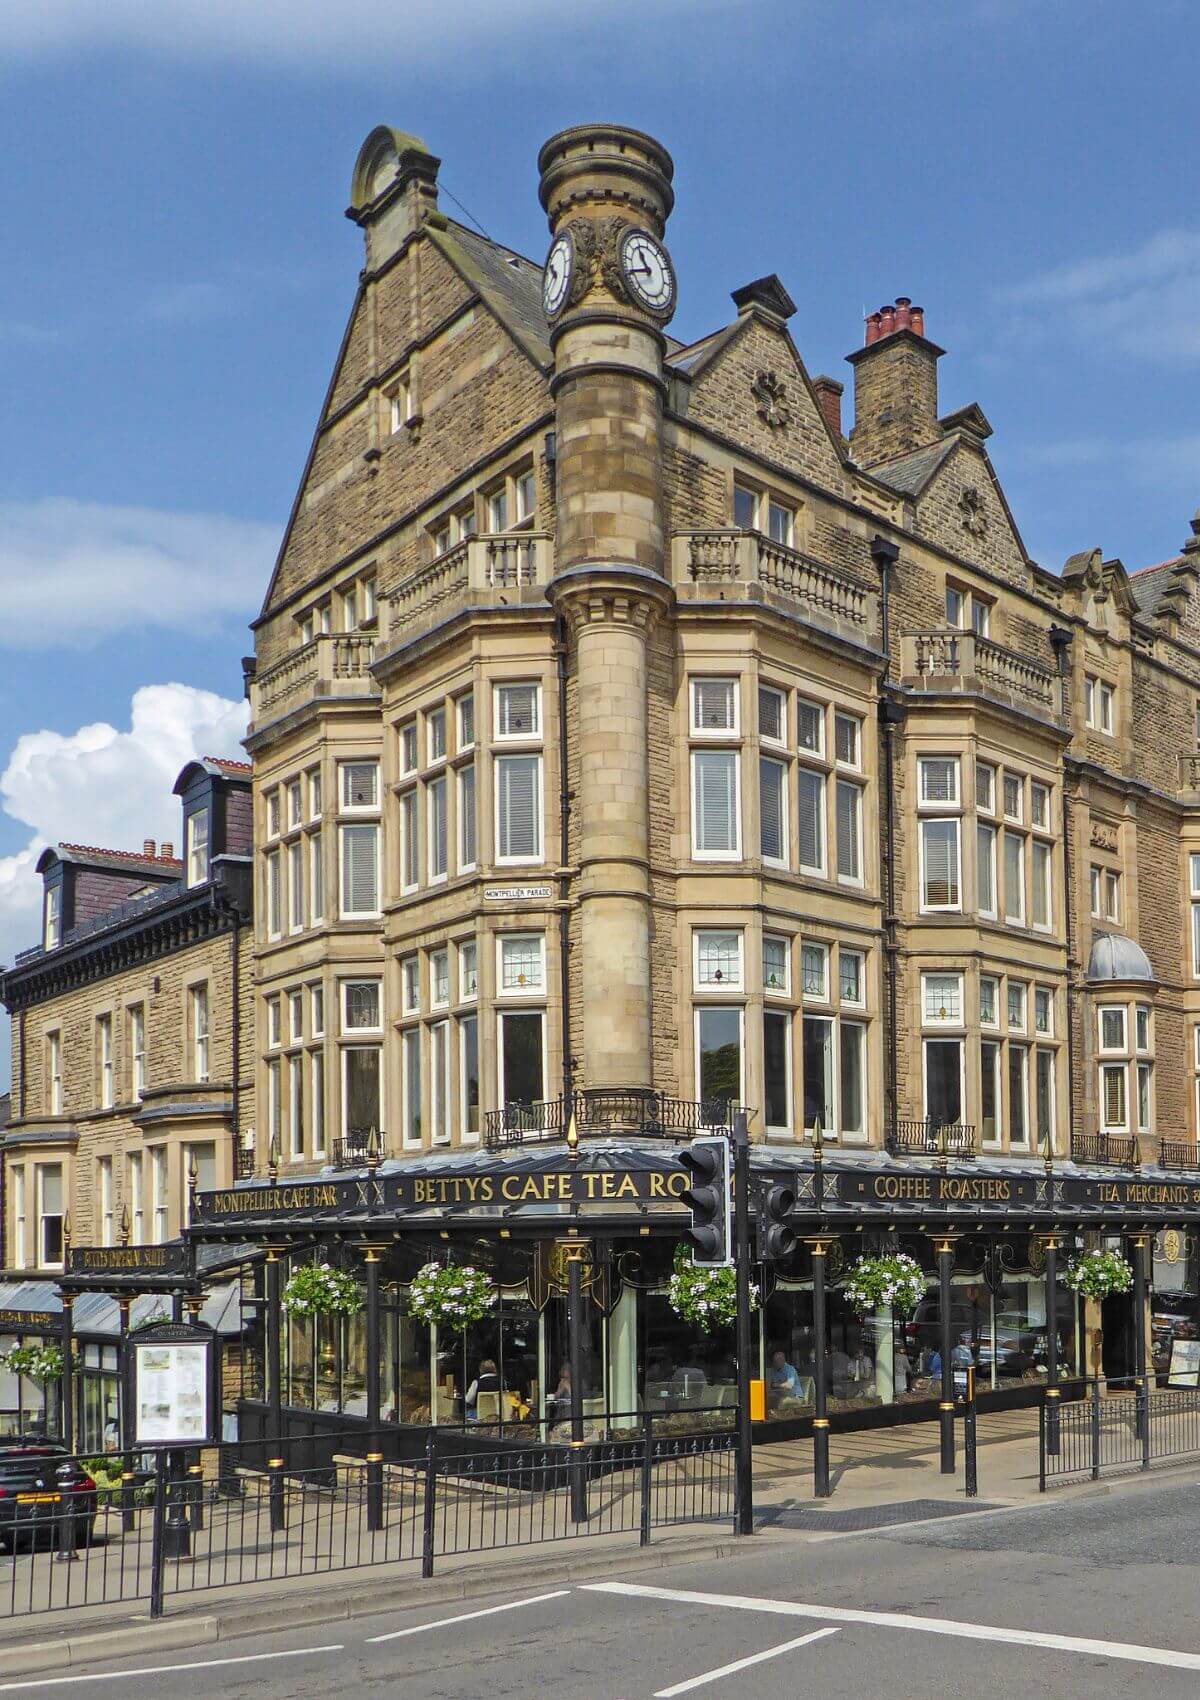 Bettys Café Tea Rooms is a famous place to visit on a day out in Harrogate